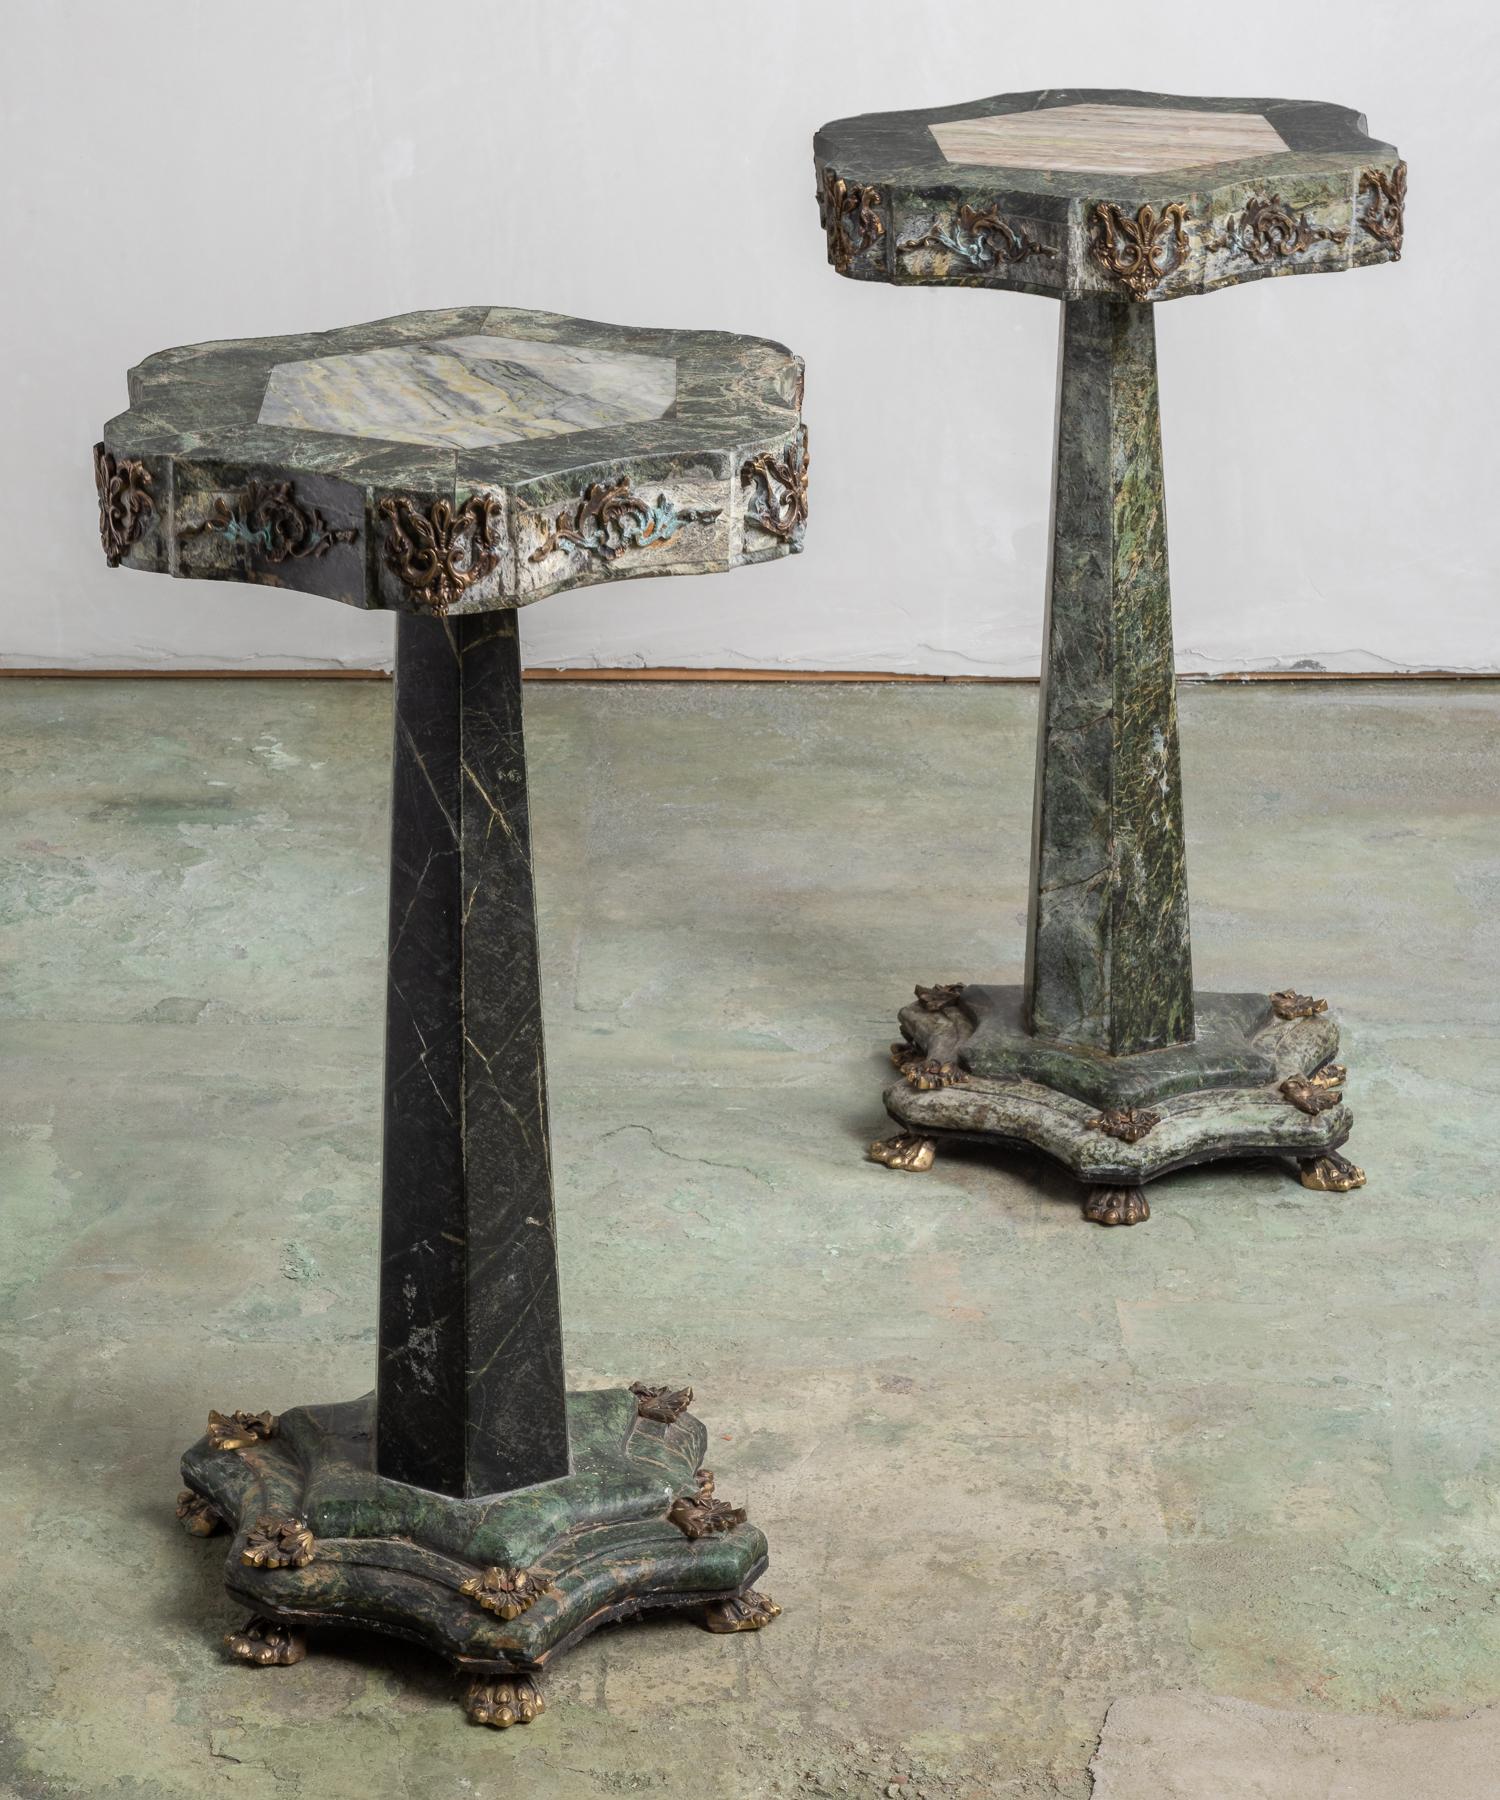 Pair of marble and Ormolu pedestals, America, circa 1910.

Decorative pair of ornate marble pedestals with ormolu details from Newport, Rhode Island.

This piece ships from Providence, Rhode Island.